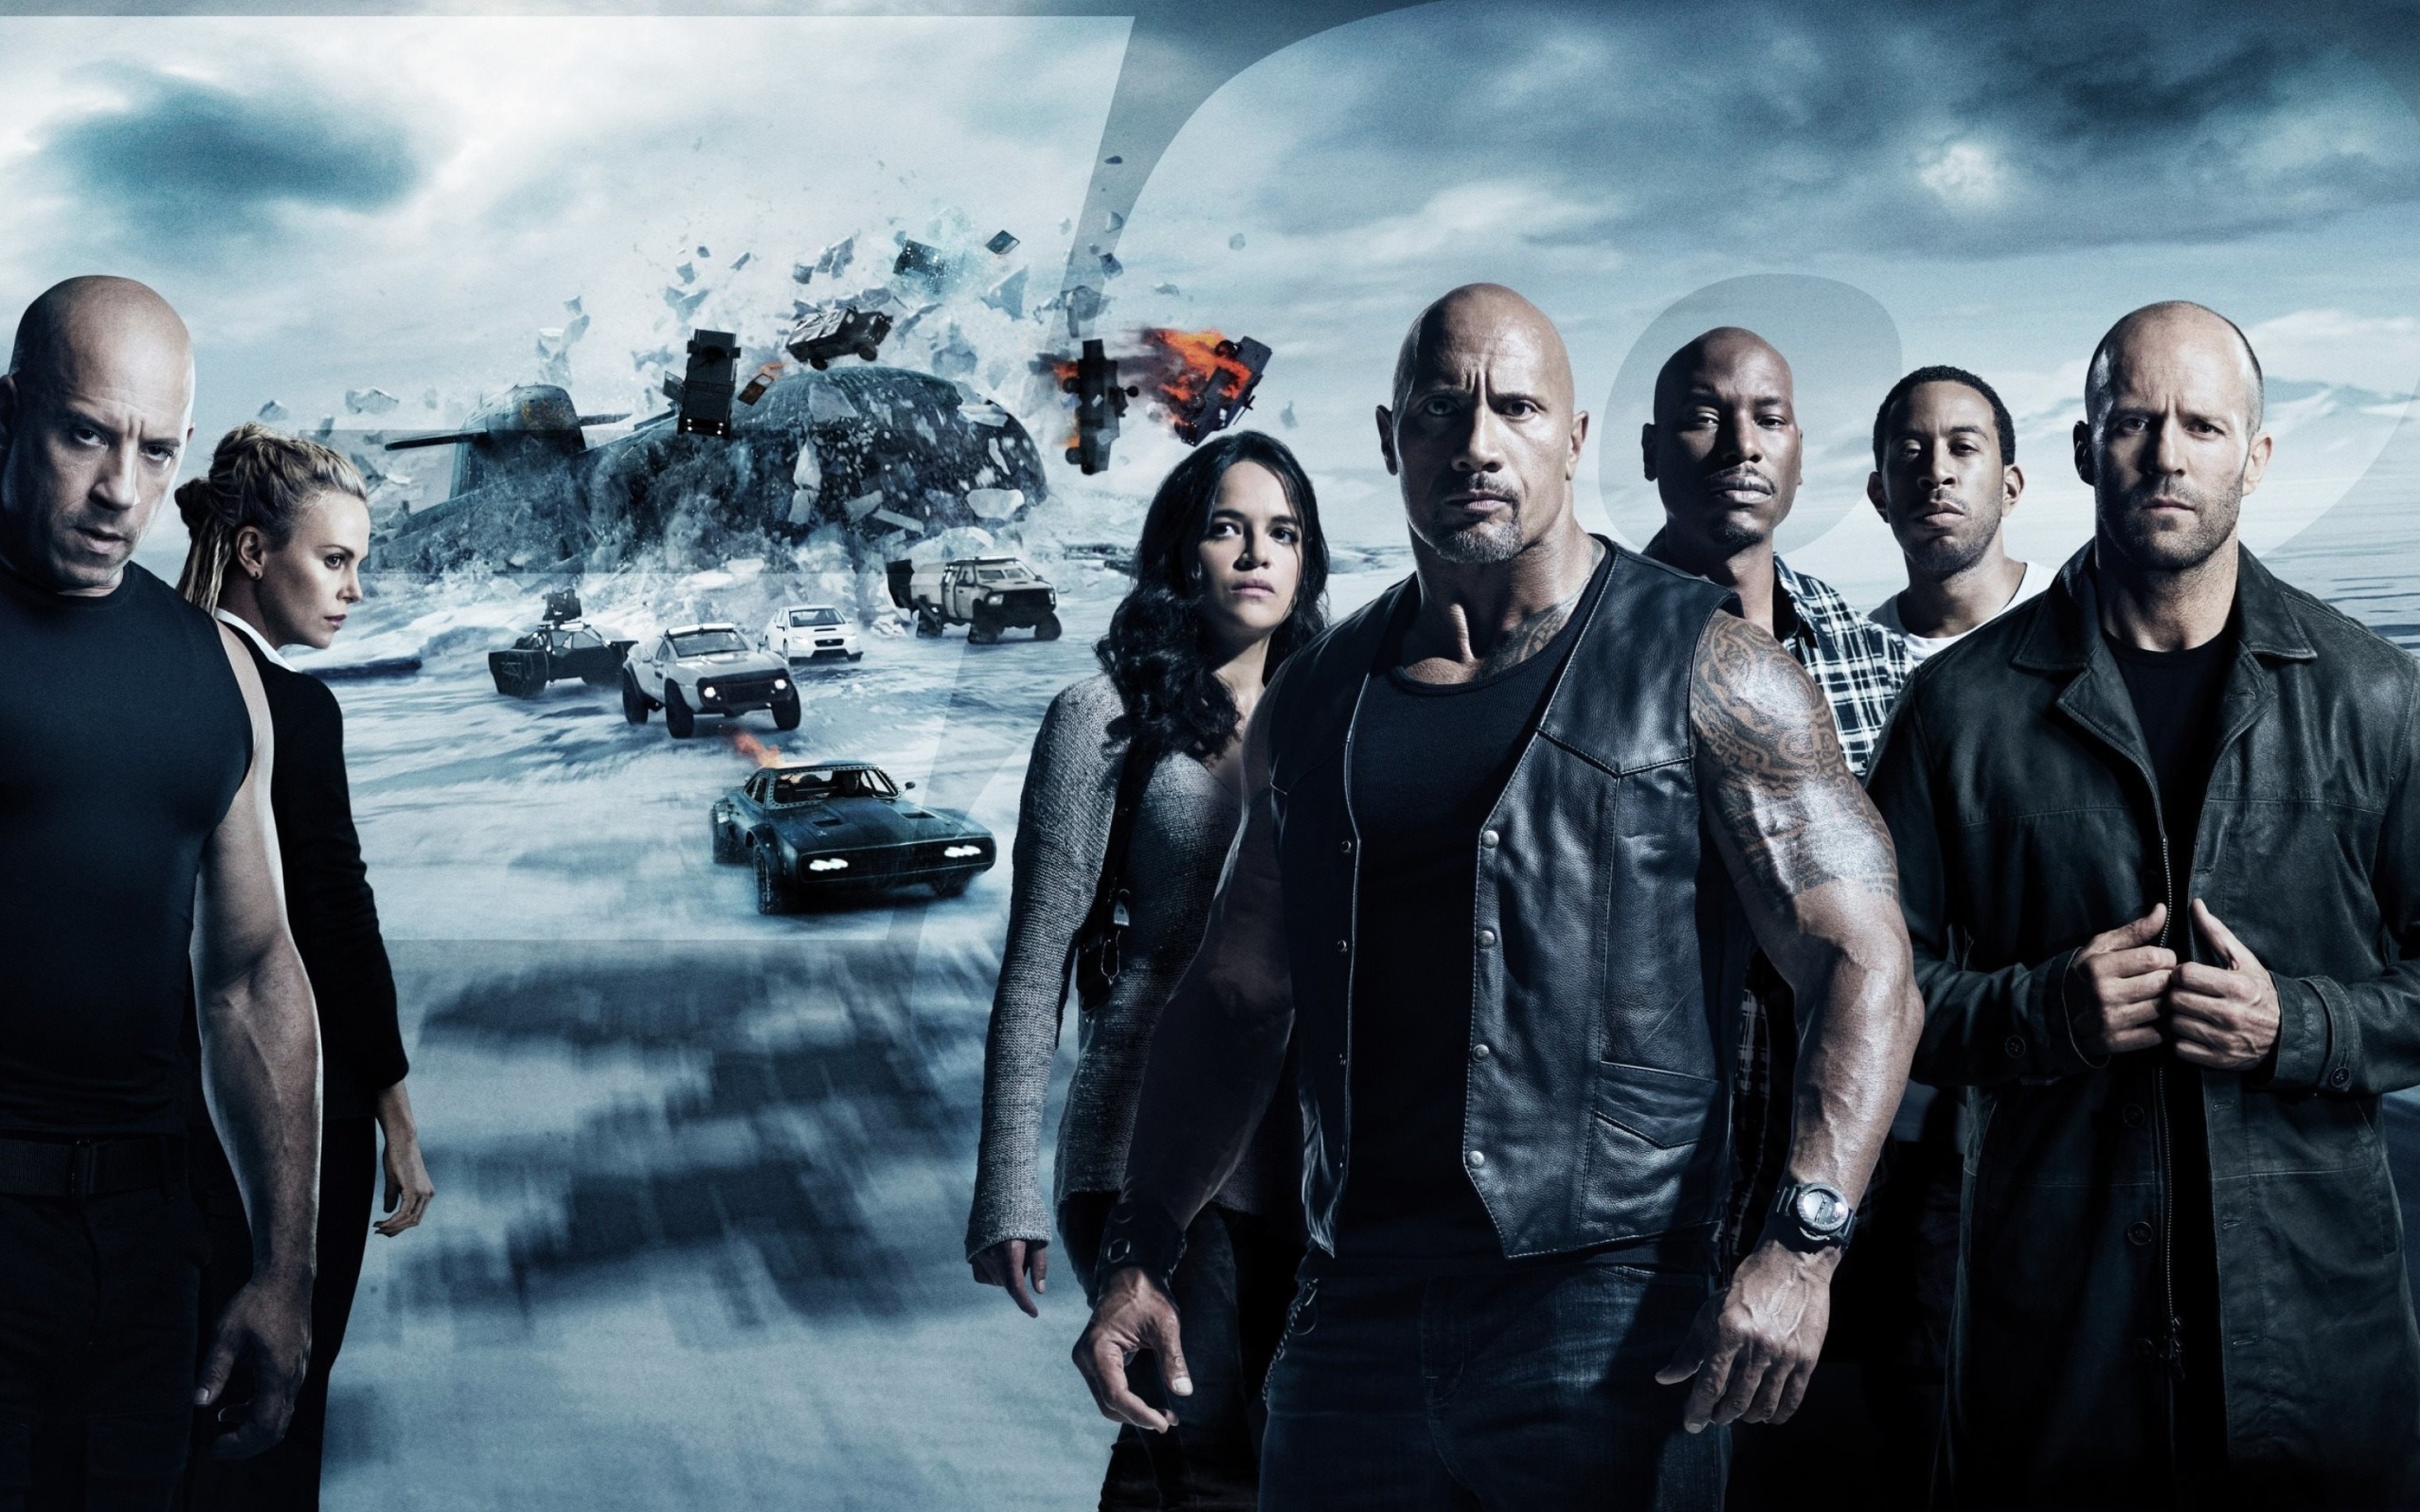 Обои The Fate of the Furious with Vin Diesel, Dwayne Johnson, Charlize Theron 2560x1600